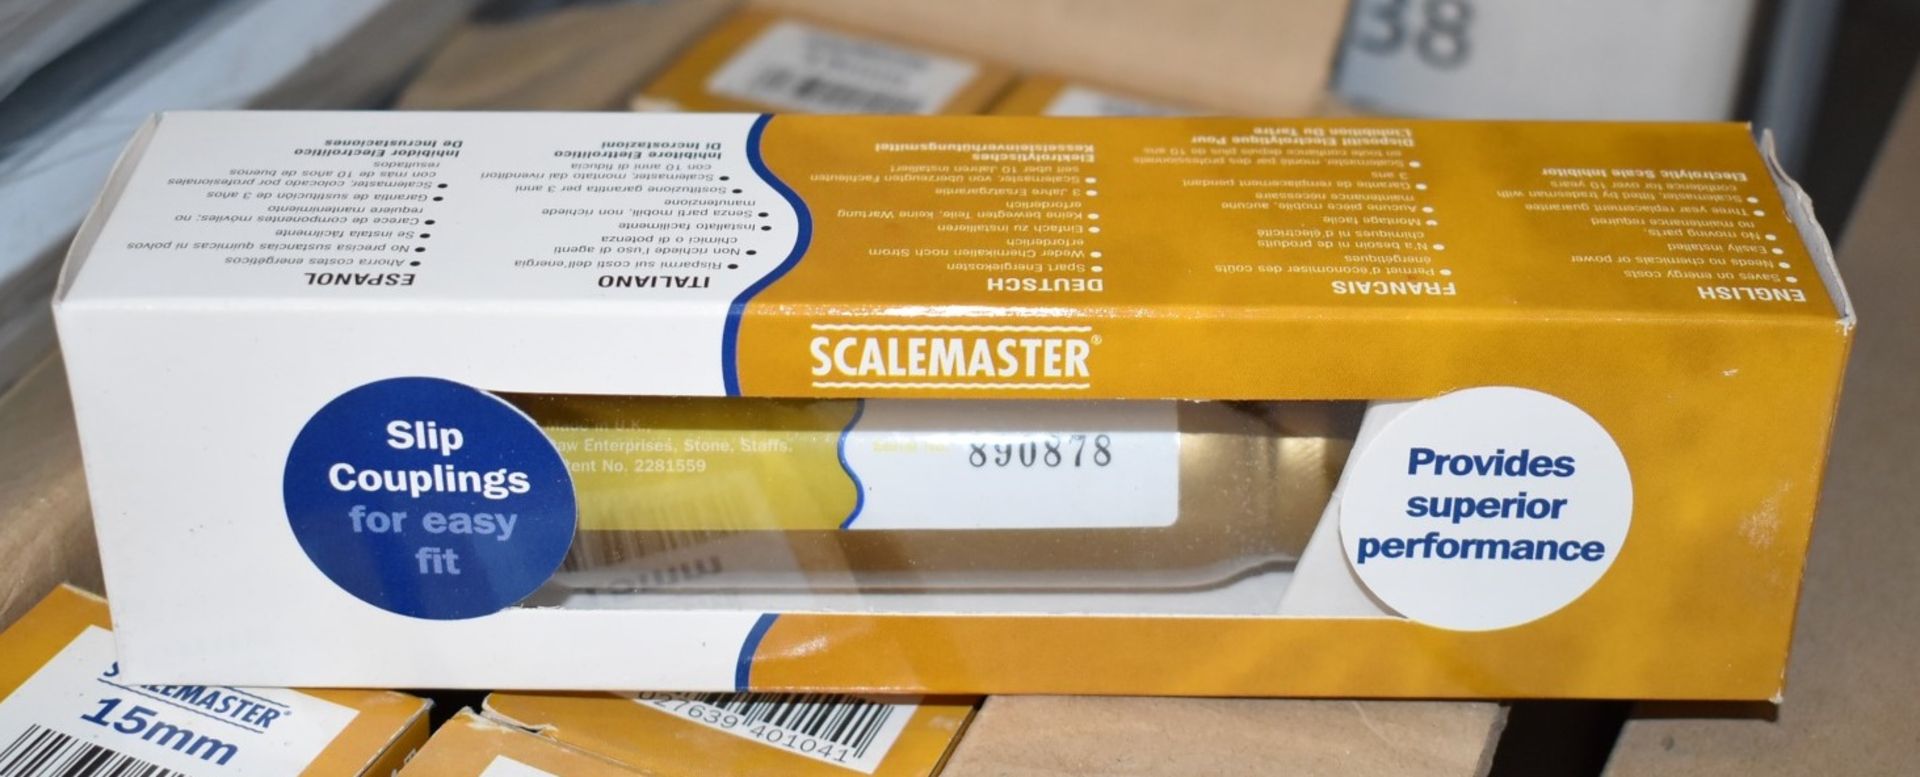 7 x Scalemaster Electrolytic Gold Electrolytic 15mm Limescale Remover - New Boxed Stock - RRP £330 - Image 4 of 5